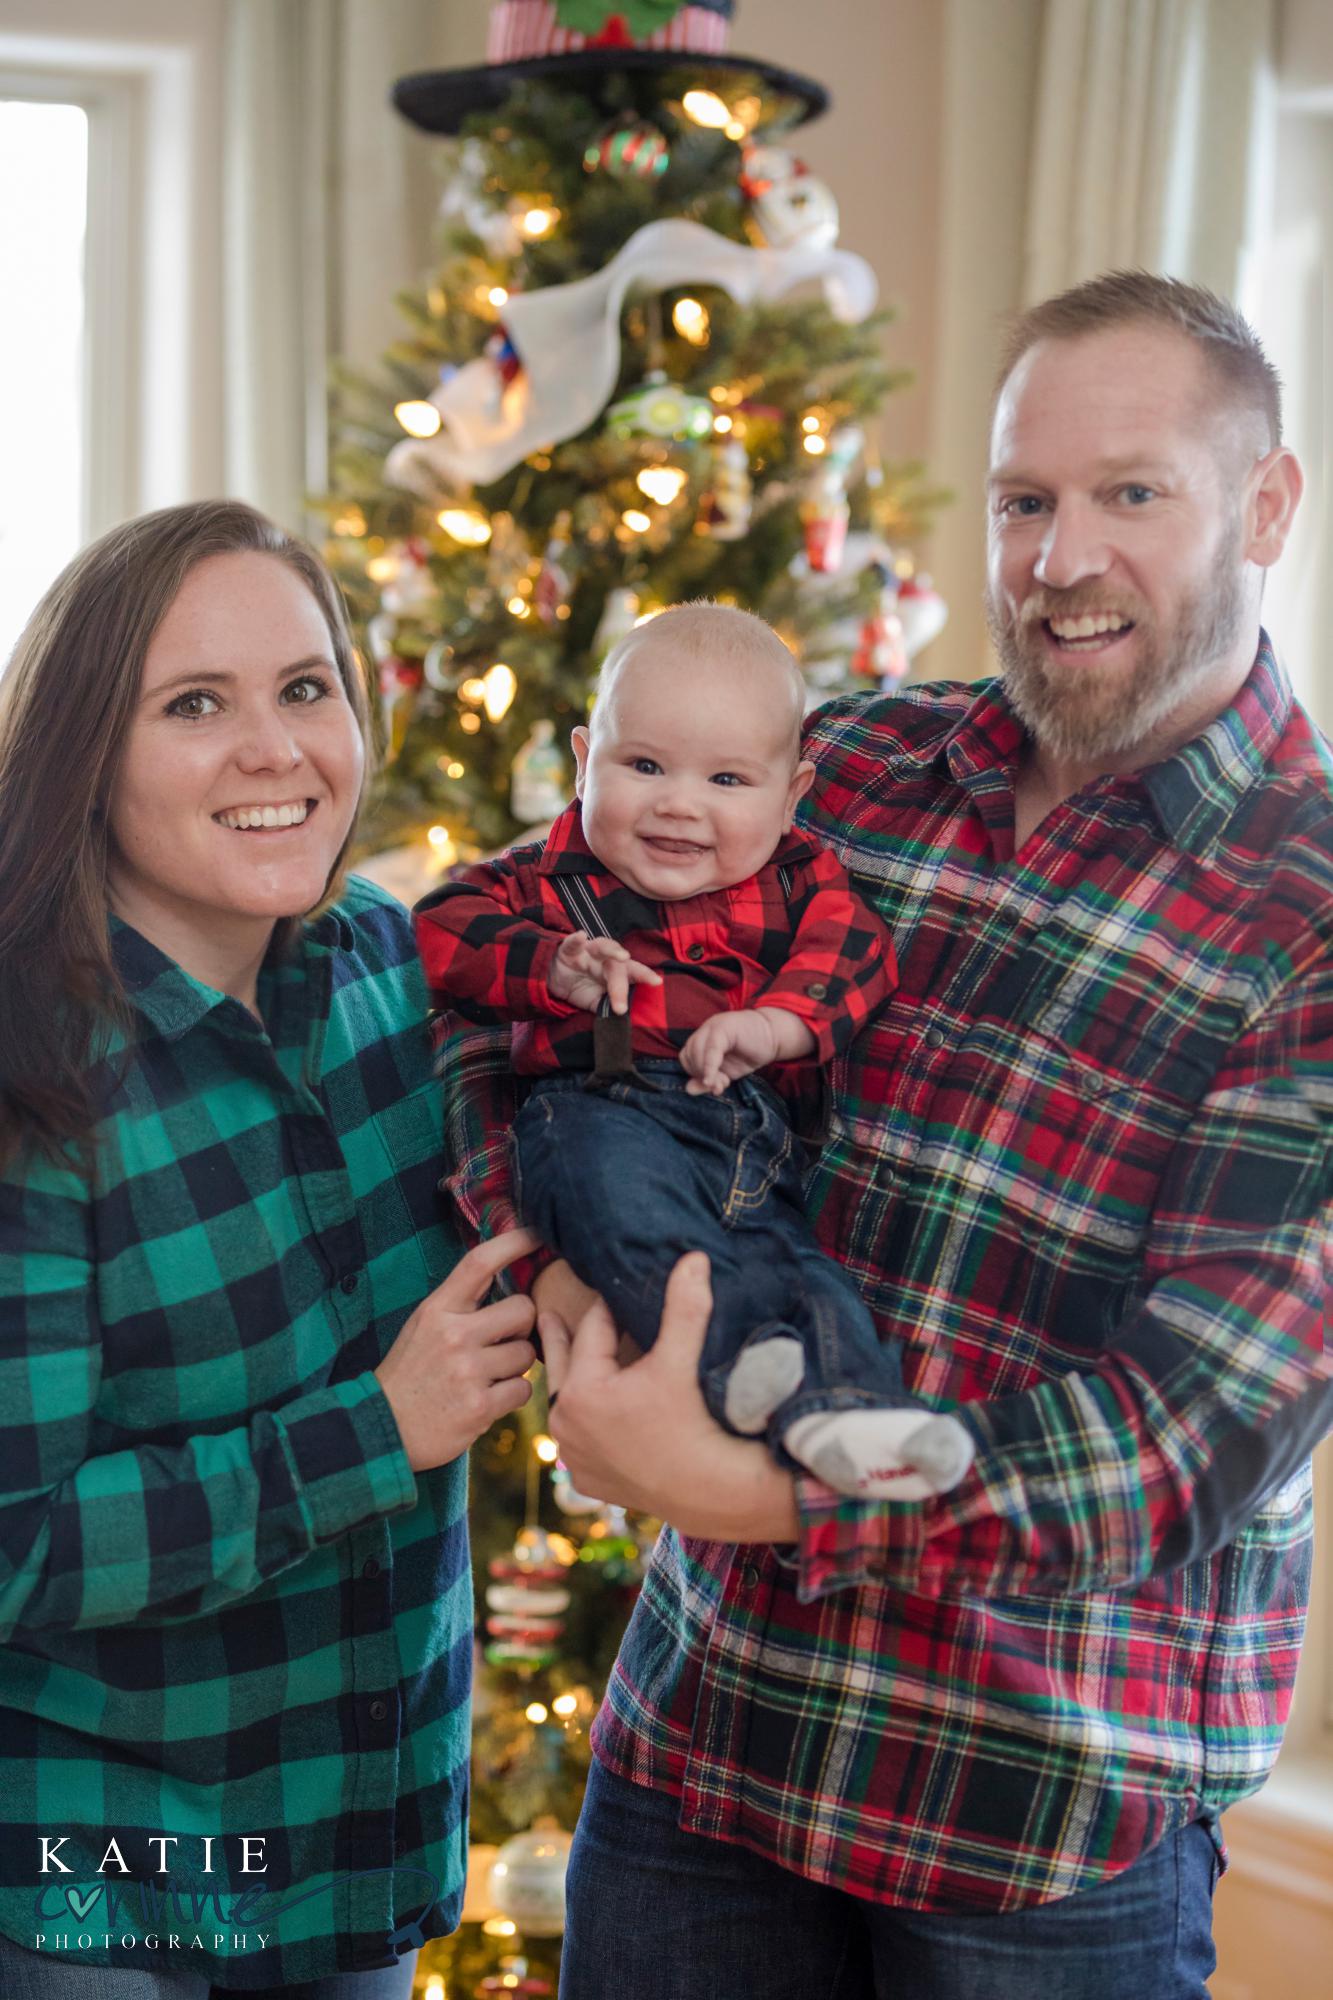 plaid clad couple pose for Photographer with their baby